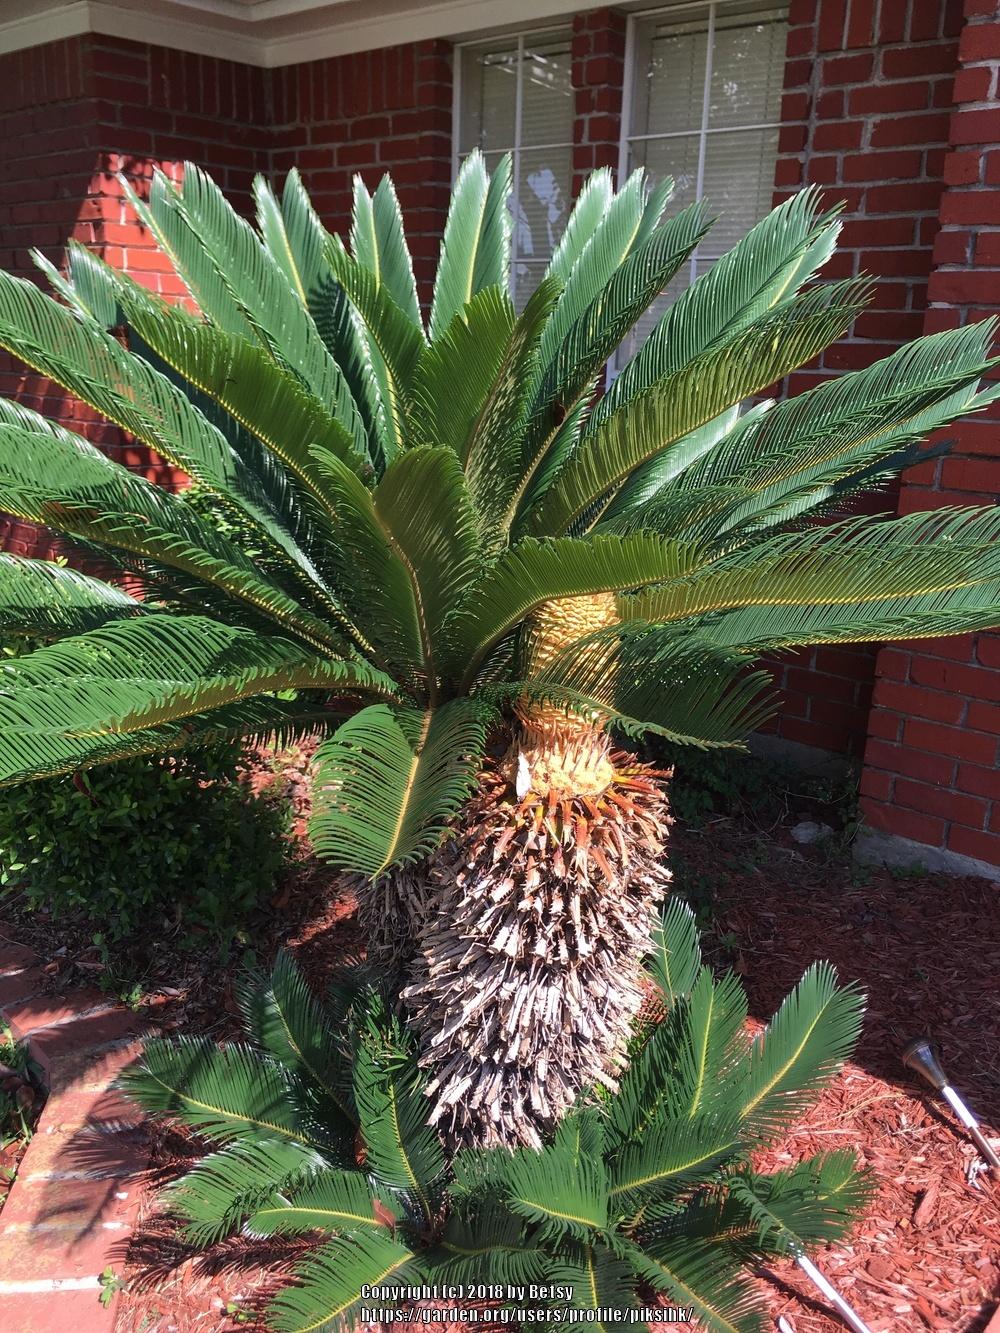 Photo of Sago Palm (Cycas revoluta) uploaded by piksihk